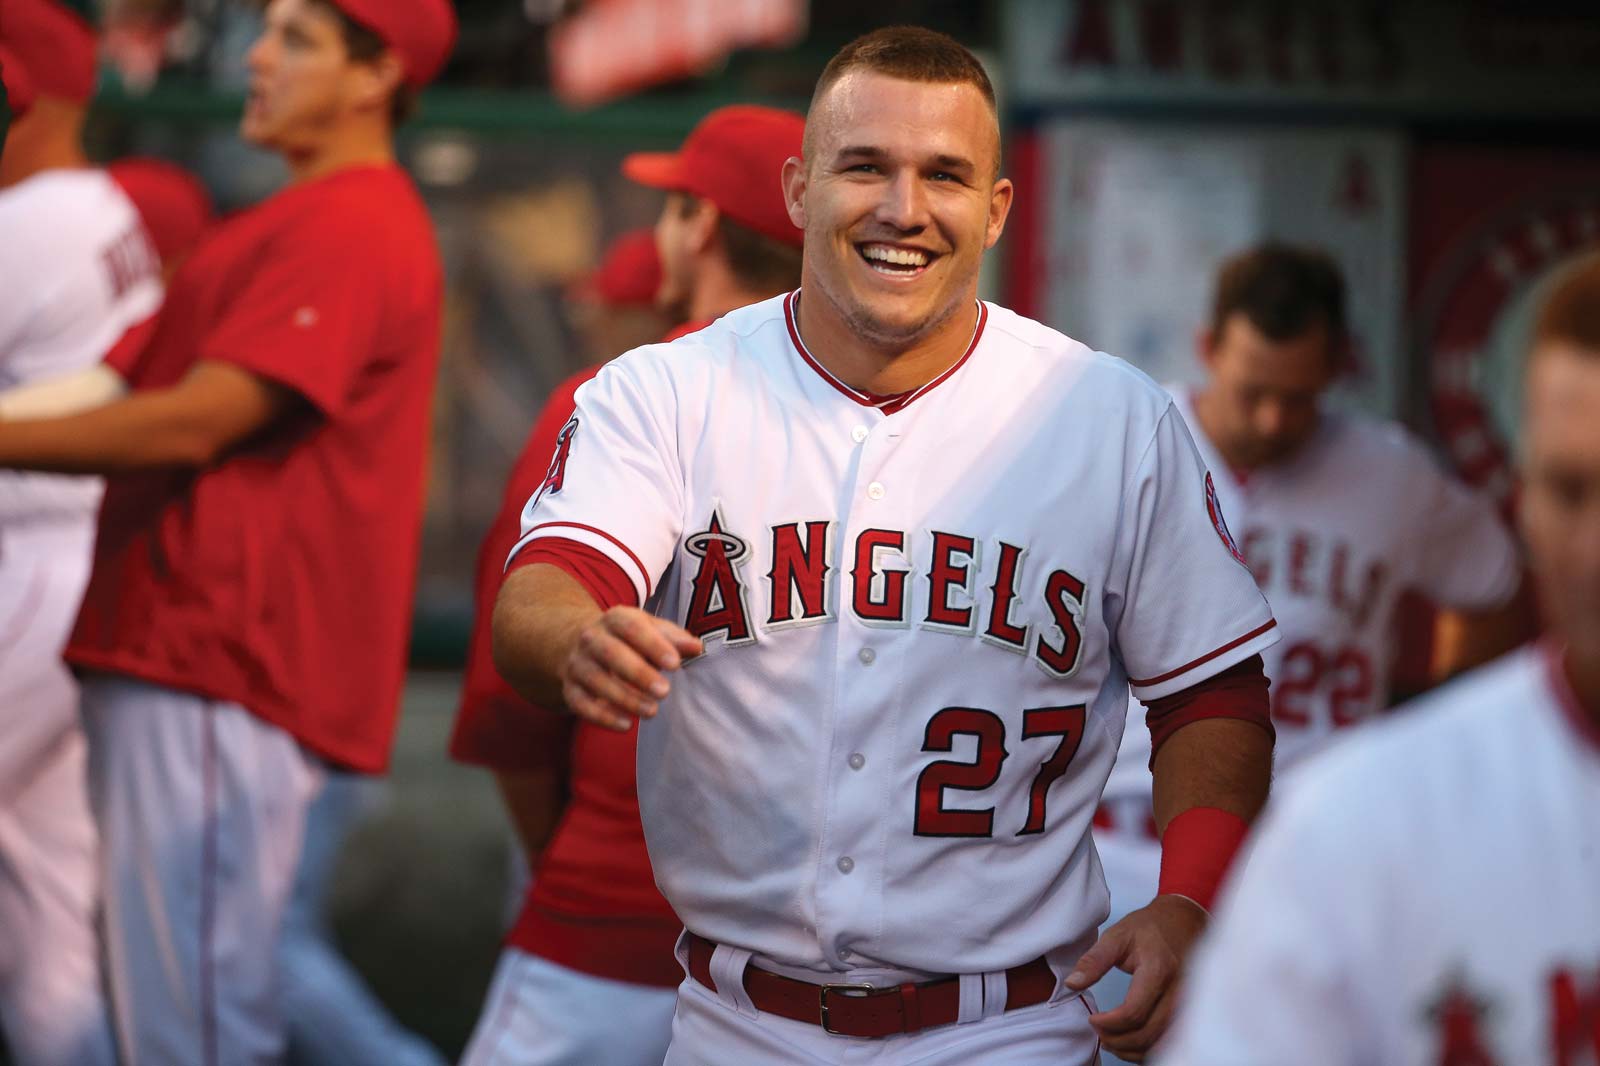 Mike Trout’s MLB Debut Shirt Likely To Be Sold For Over $ 1 Million In Auction